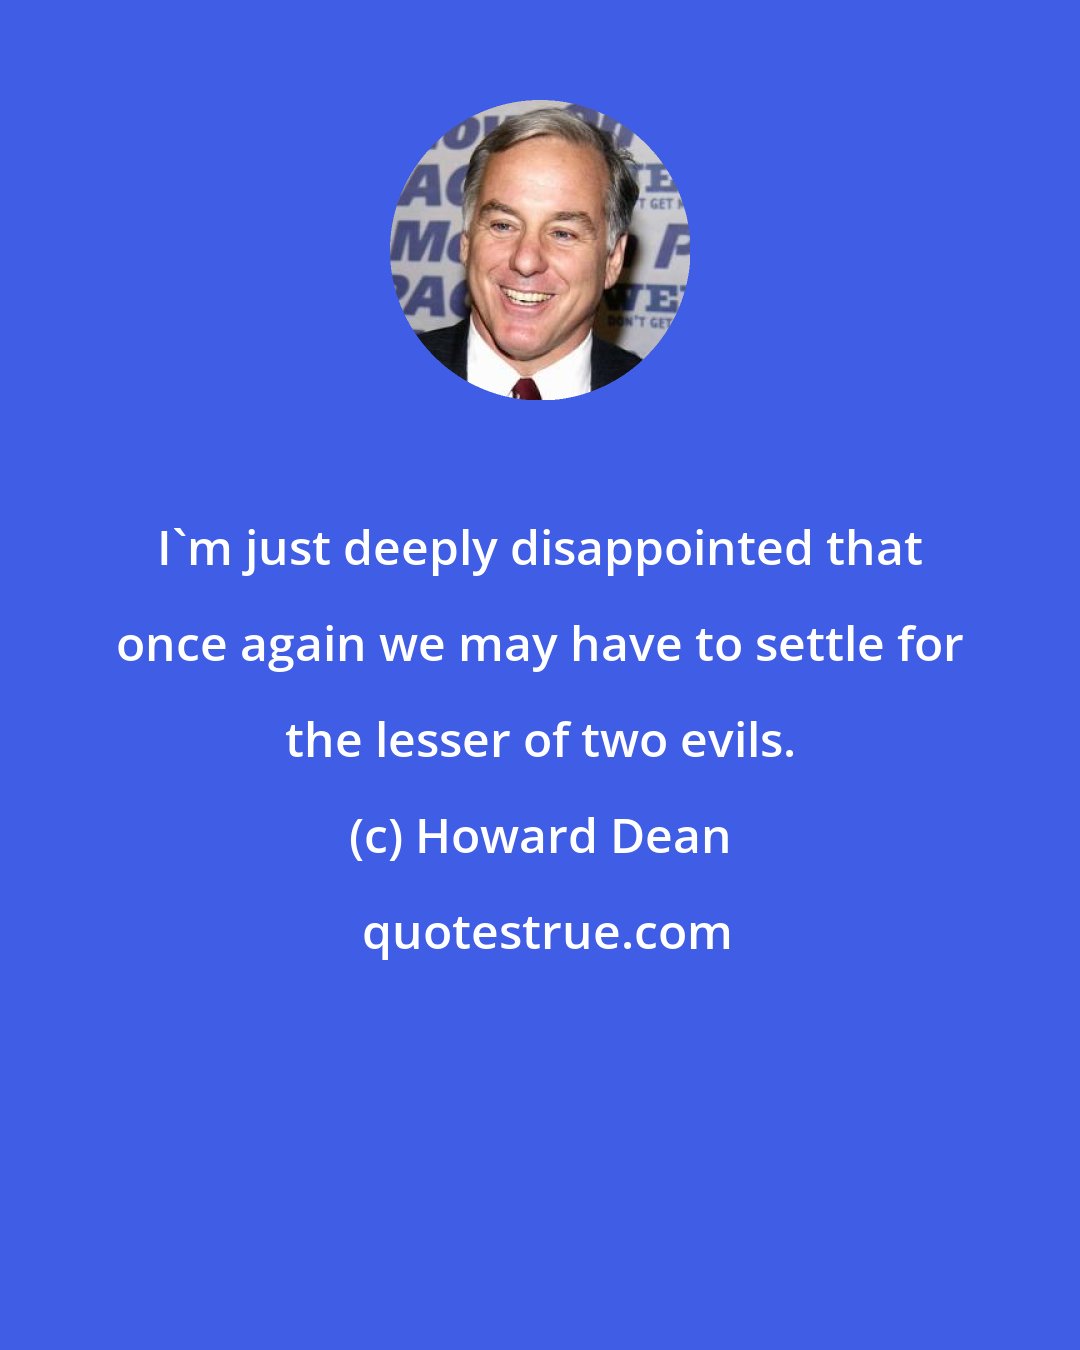 Howard Dean: I'm just deeply disappointed that once again we may have to settle for the lesser of two evils.